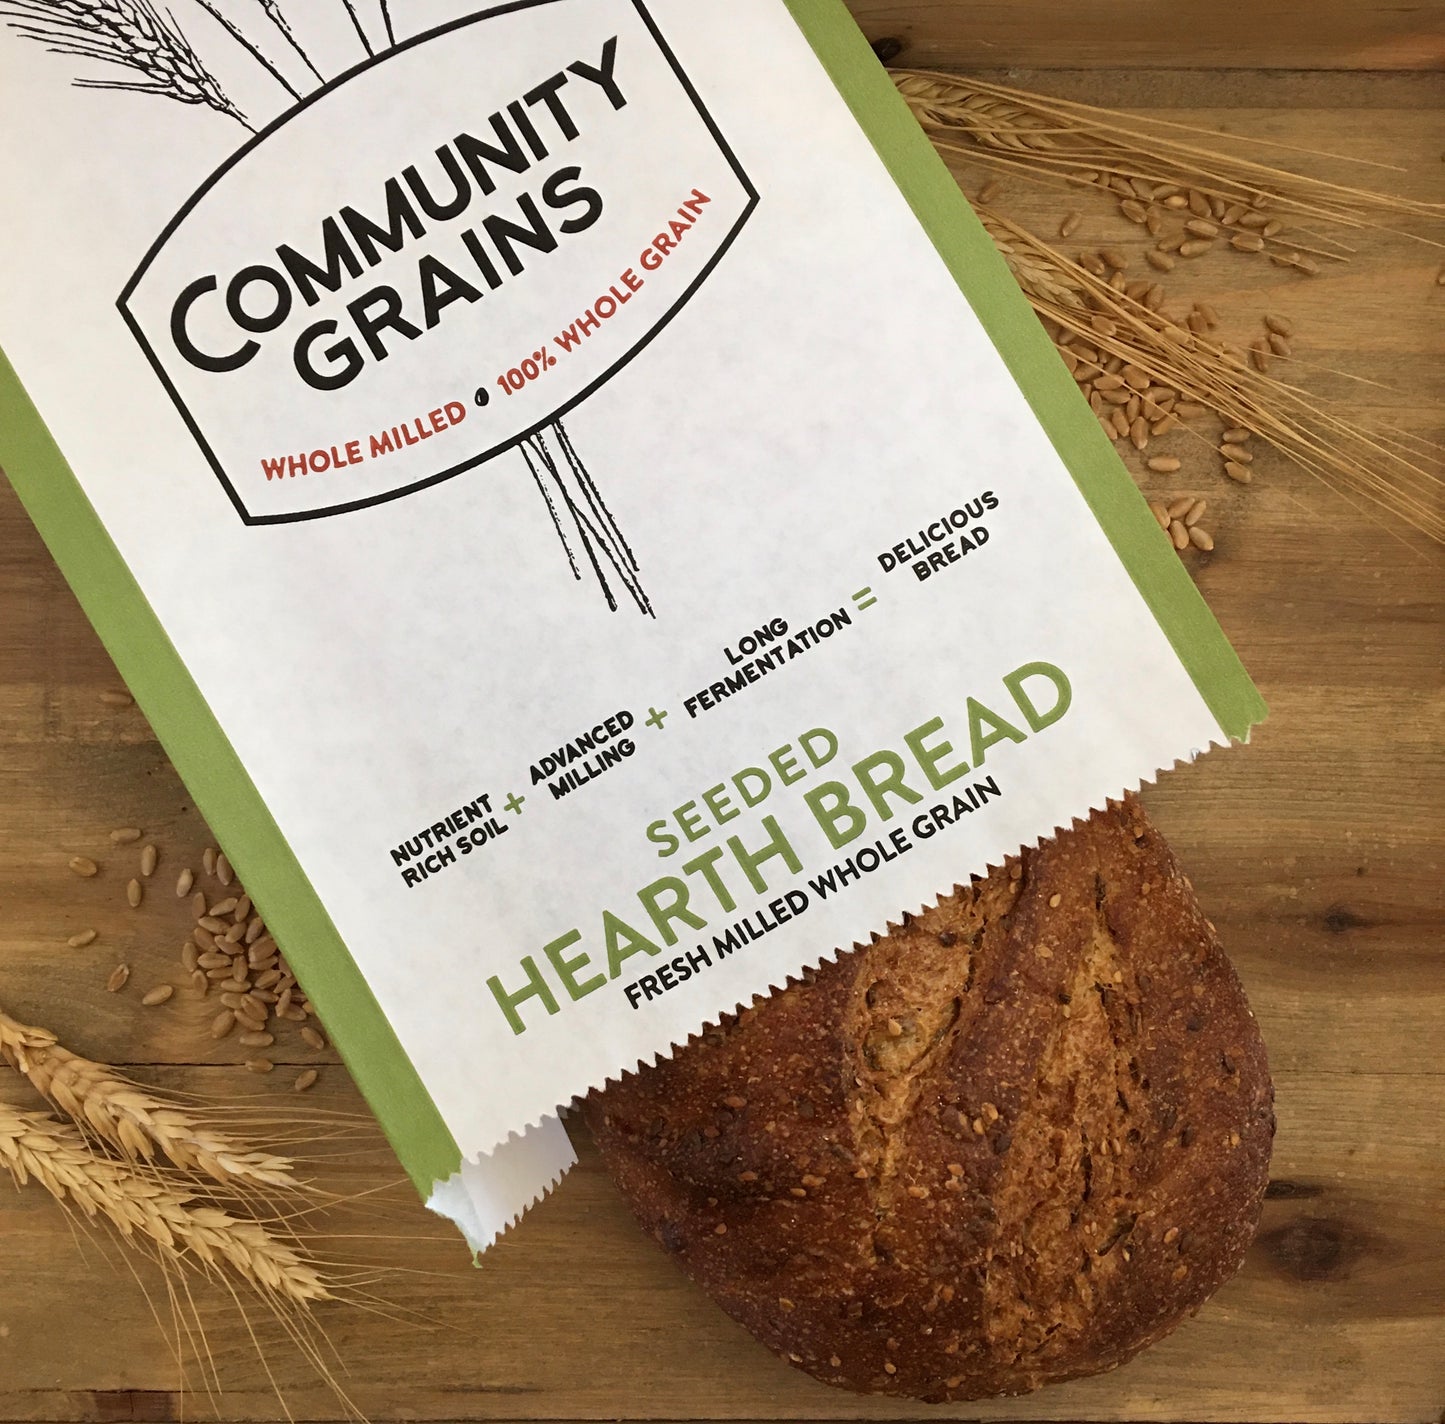 Hearth Bread – Seeded